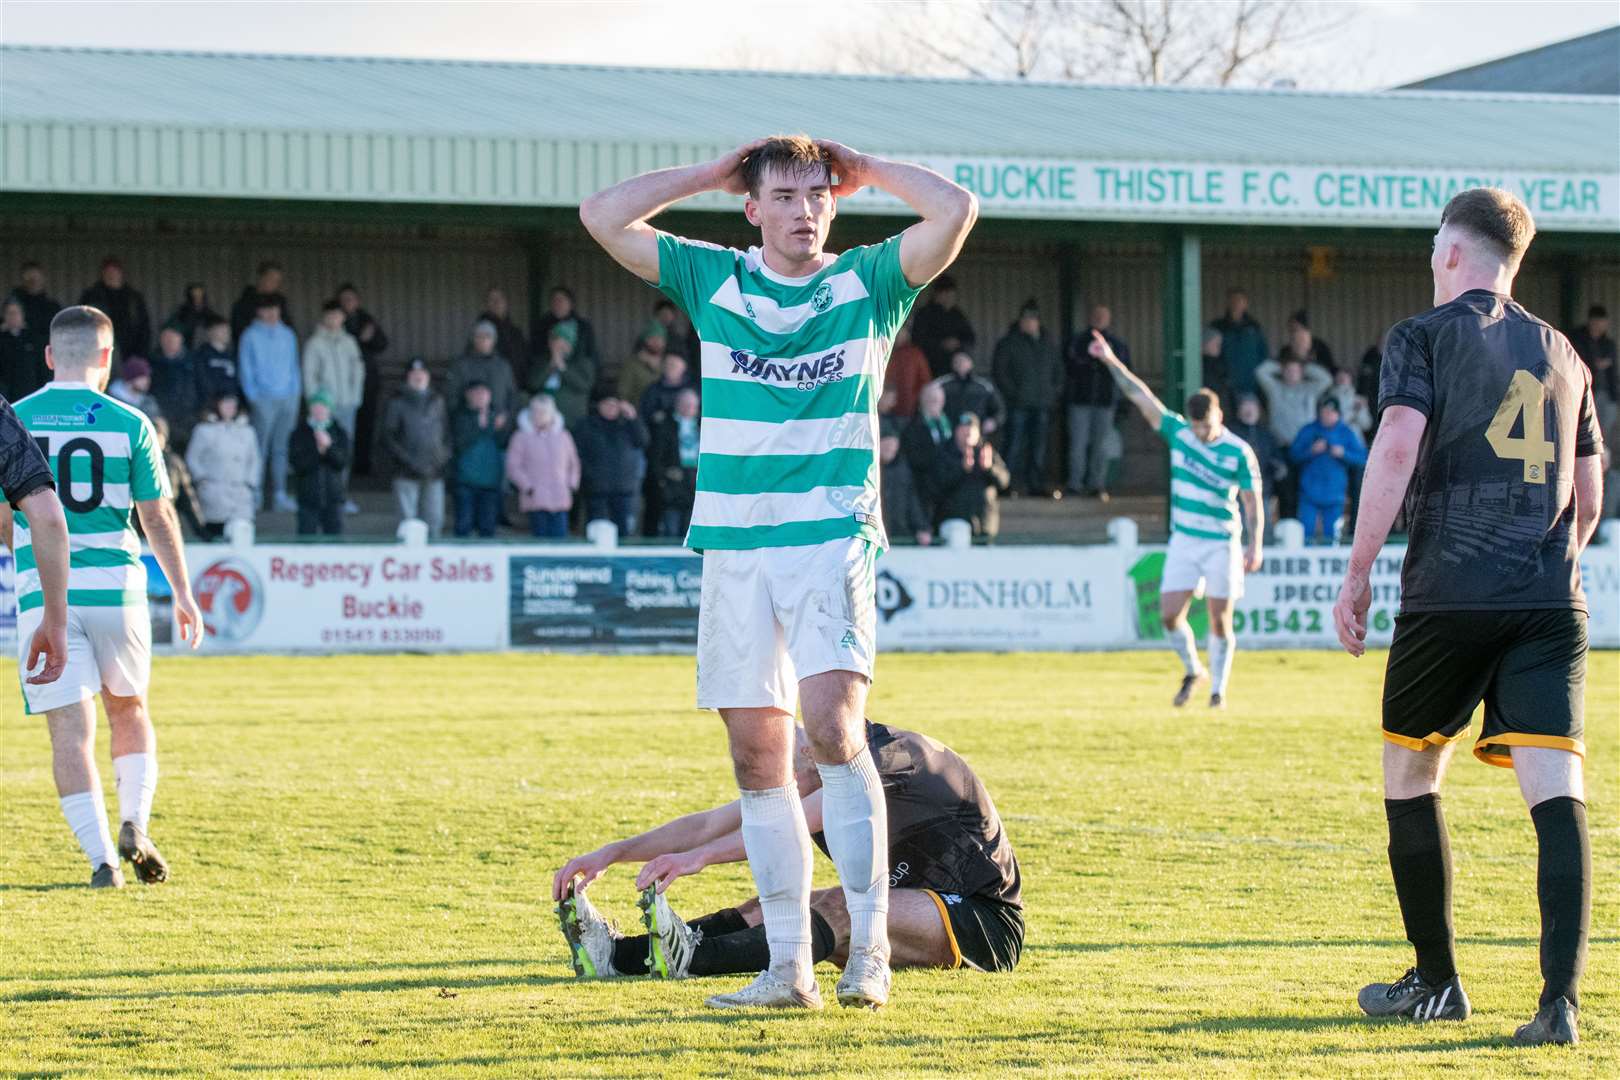 Buckie's Jack Murray can't believe a missed chance. ..Buckie Thistle FC (2) vs Clachnacuddin FC (3) - Highland Football League 23/24 - Victoria Park, Buckie 24/02/2024...Picture: Daniel Forsyth..